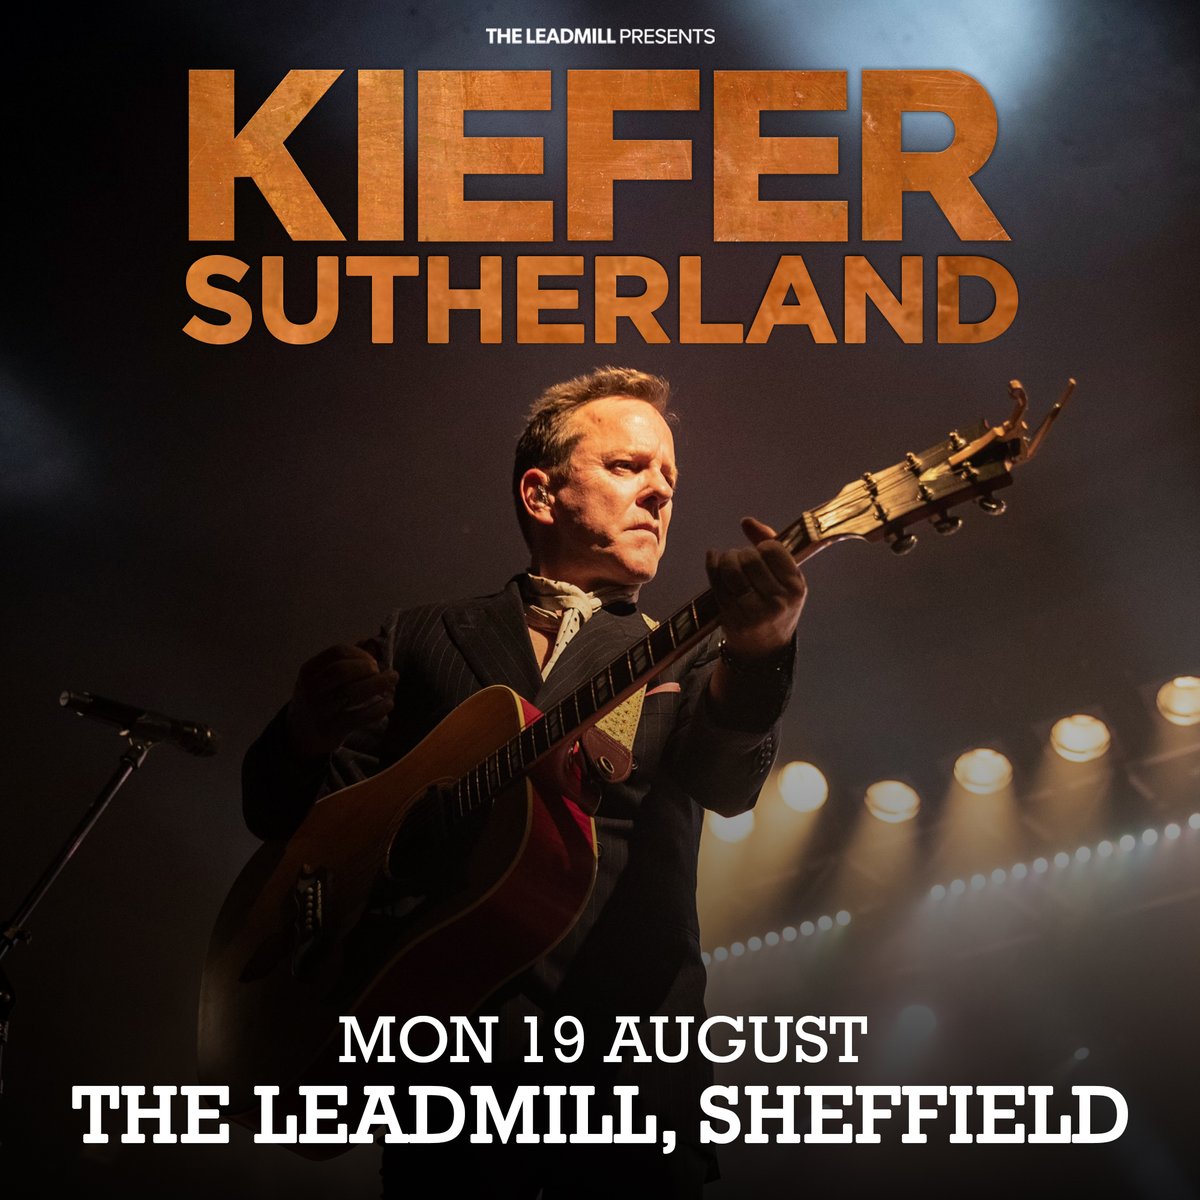 HUGE NEW SHOW - Kiefer Sutherland 🚨 An intimate audience with a legendary performer, multi award-winning actor and Hollywood icon @RealKiefer joins us for a country showcase this August 🤠 Tickets on sale this Friday at 10am from leadmill.co.uk/event/kiefer-s…